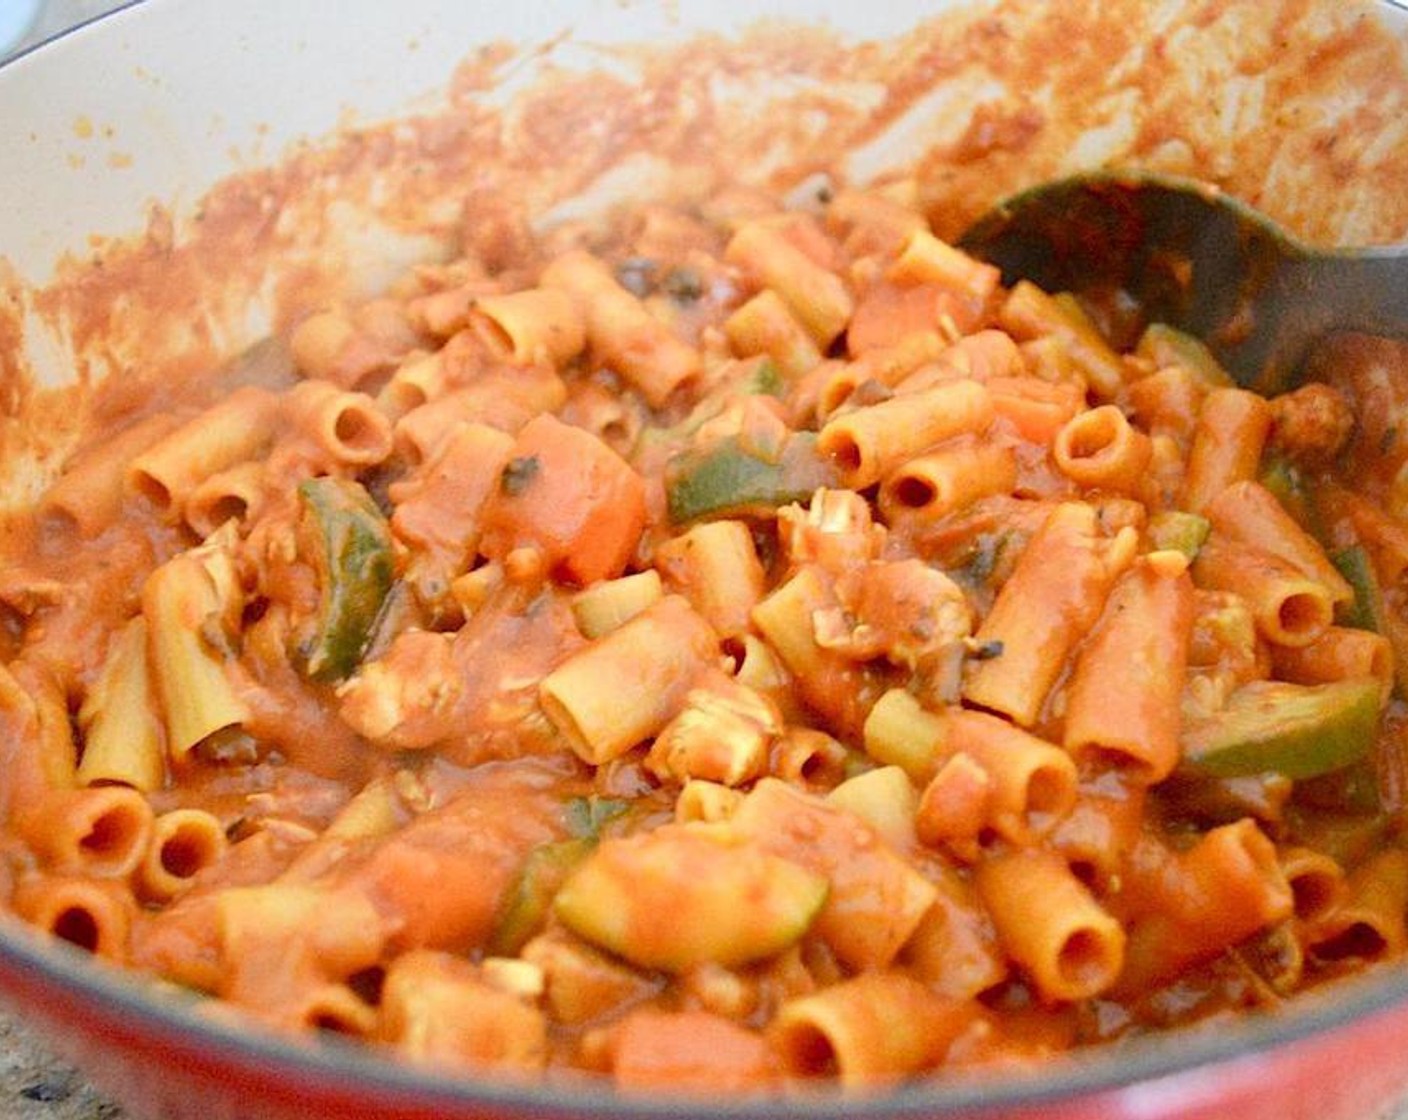 step 4 Give the whole sauce a big stir and let it simmer for 15 minutes. When the 15 minutes is up, add in the Rigatoni (1 lb) and stir it in to submerge in the sauce. Let the pasta cook until tender for 8-10 minutes, stirring often.